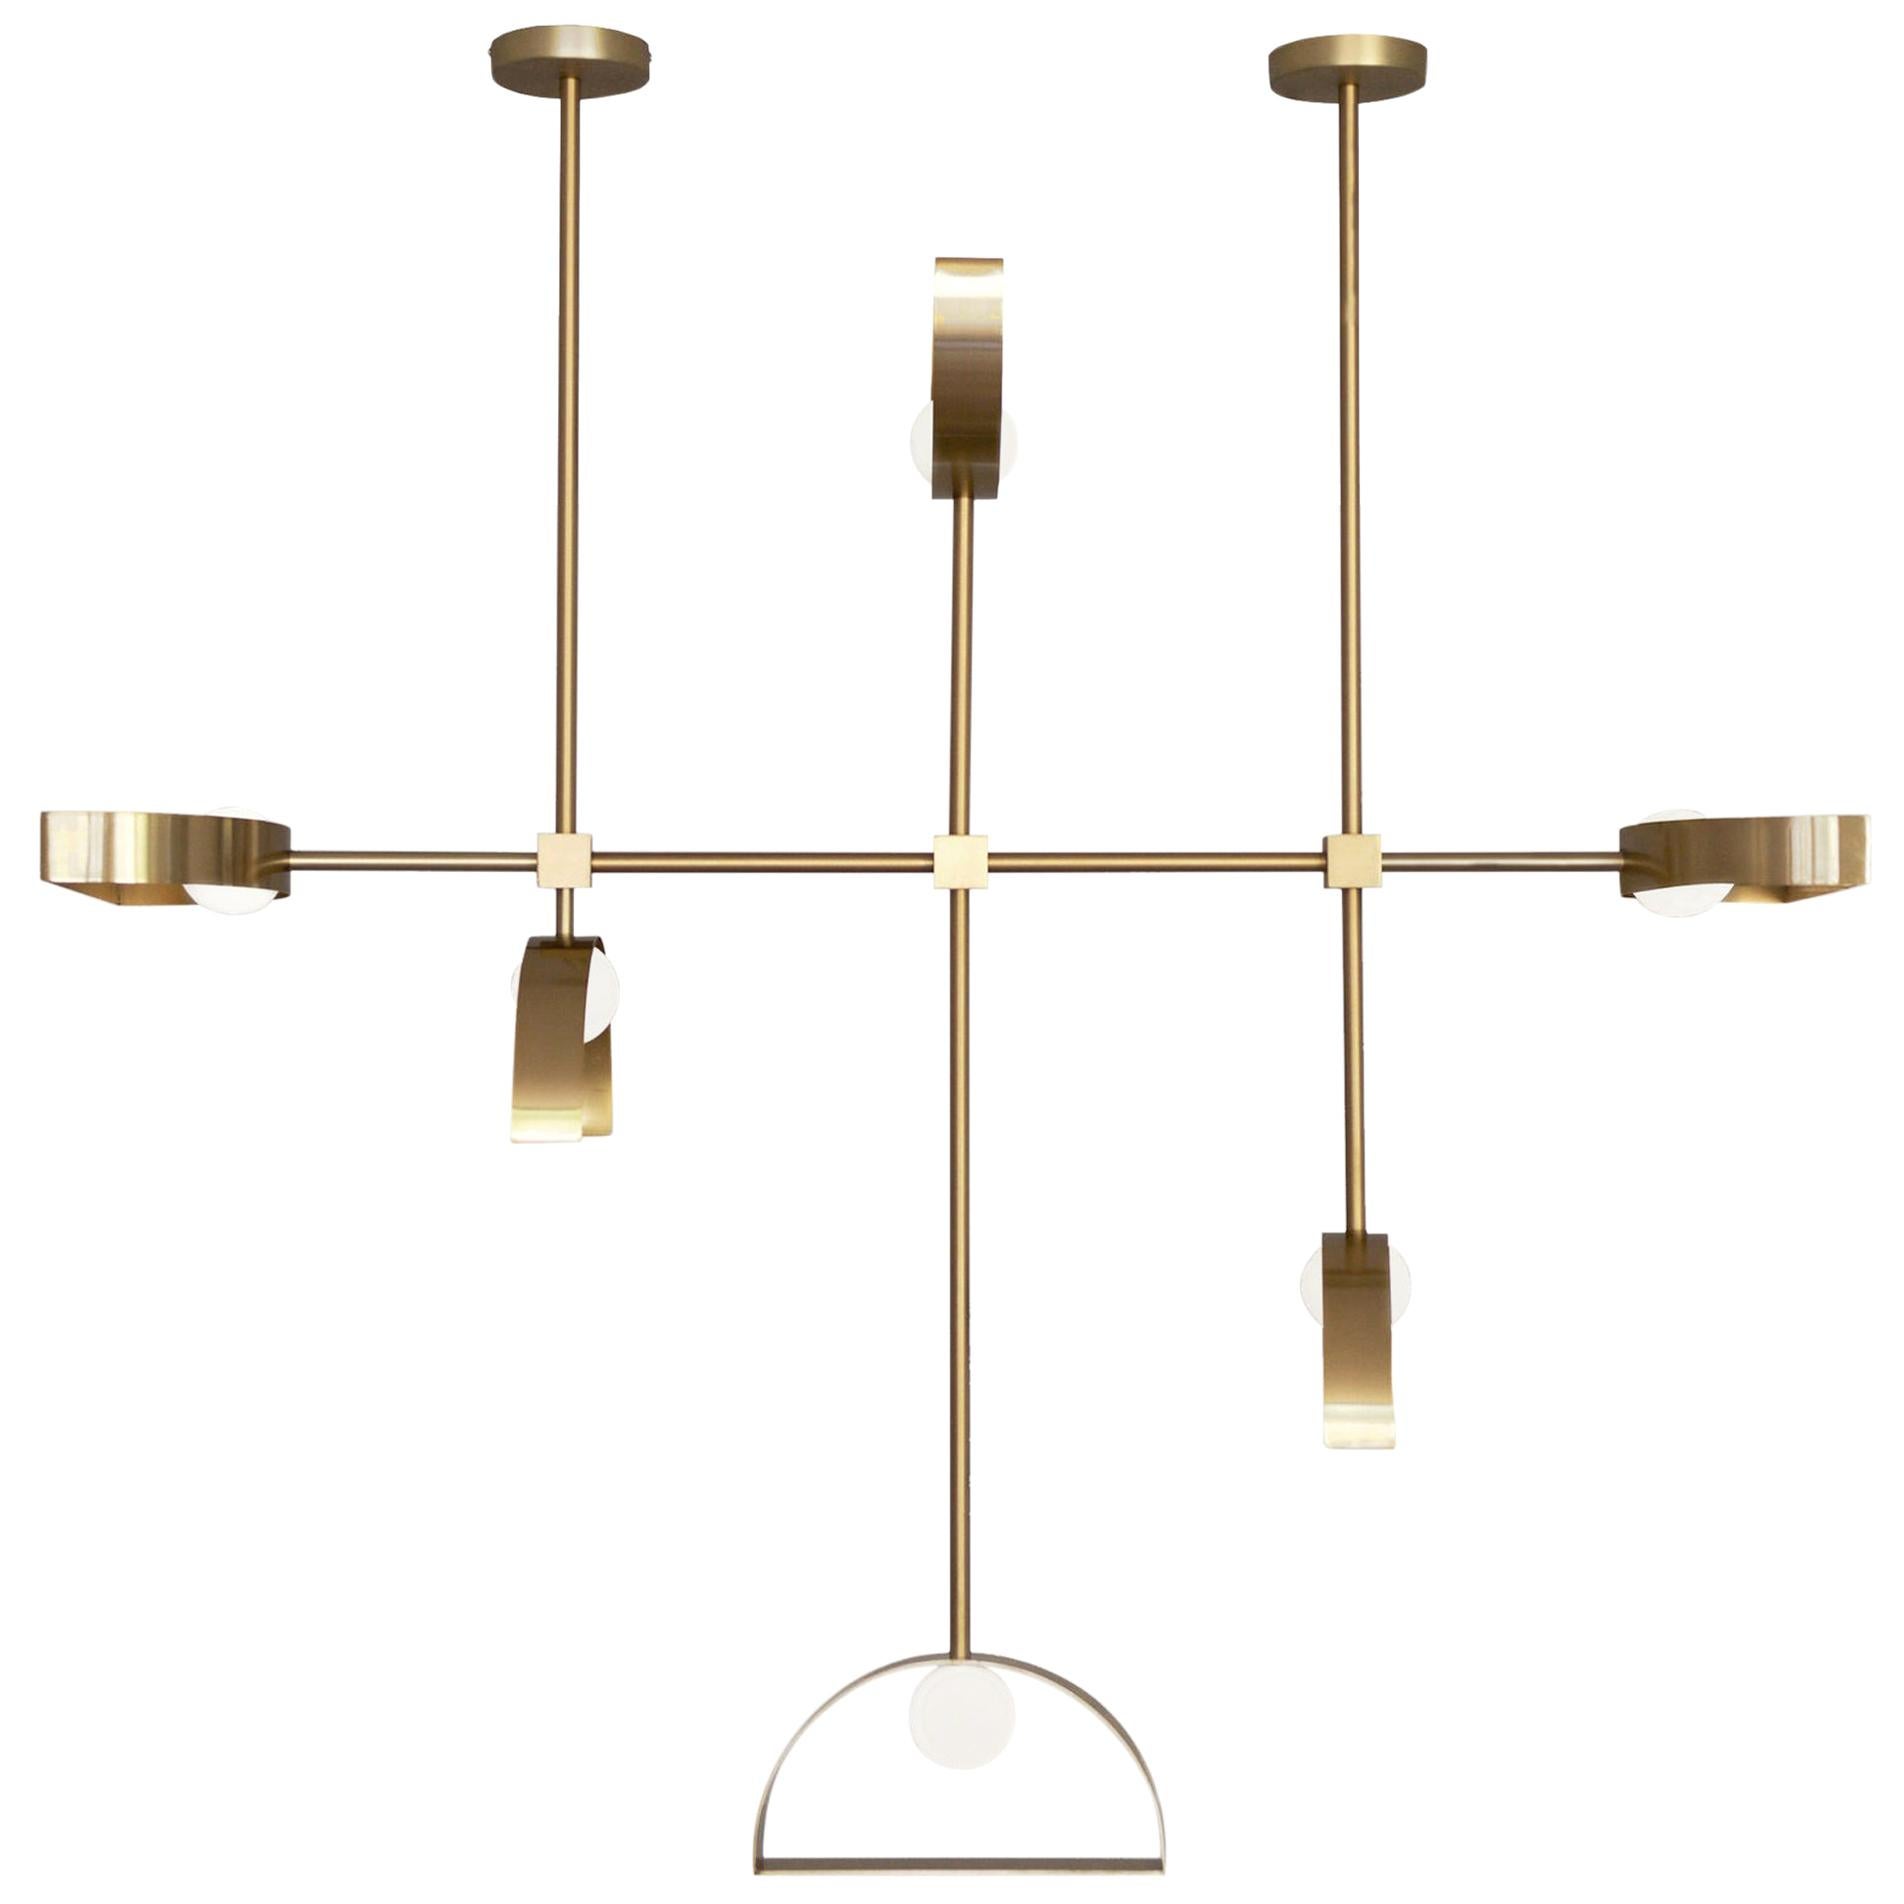 Brass Sphere and Cut Circle Pendant Lamp by Square in Circle